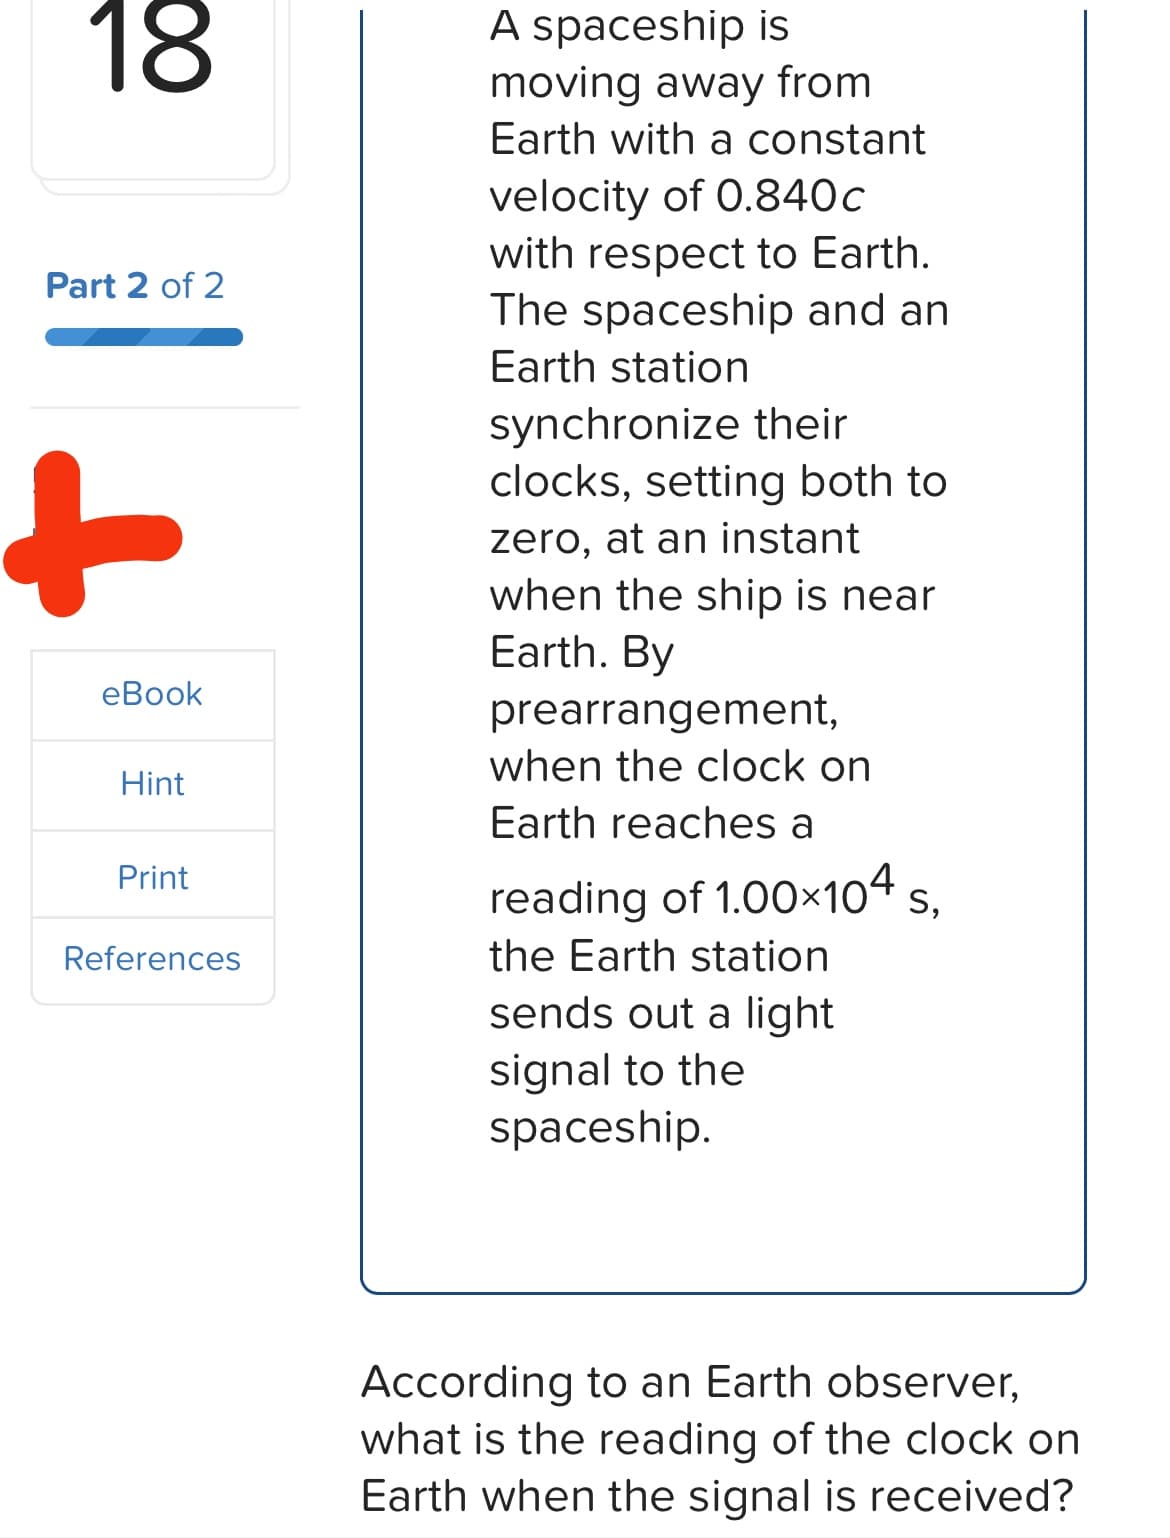 18
Part 2 of 2
+
eBook
Hint
Print
References
A spaceship is
moving away from
Earth with a constant
velocity of 0.840c
with respect to Earth.
The spaceship and an
Earth station
synchronize their
clocks, setting both to
zero, at an instant
when the ship is near
Earth. By
prearrangement,
when the clock on
Earth reaches a
reading of 1.00×104 S,
the Earth station
sends out a light
signal to the
spaceship.
According to an Earth observer,
what is the reading of the clock on
Earth when the signal is received?